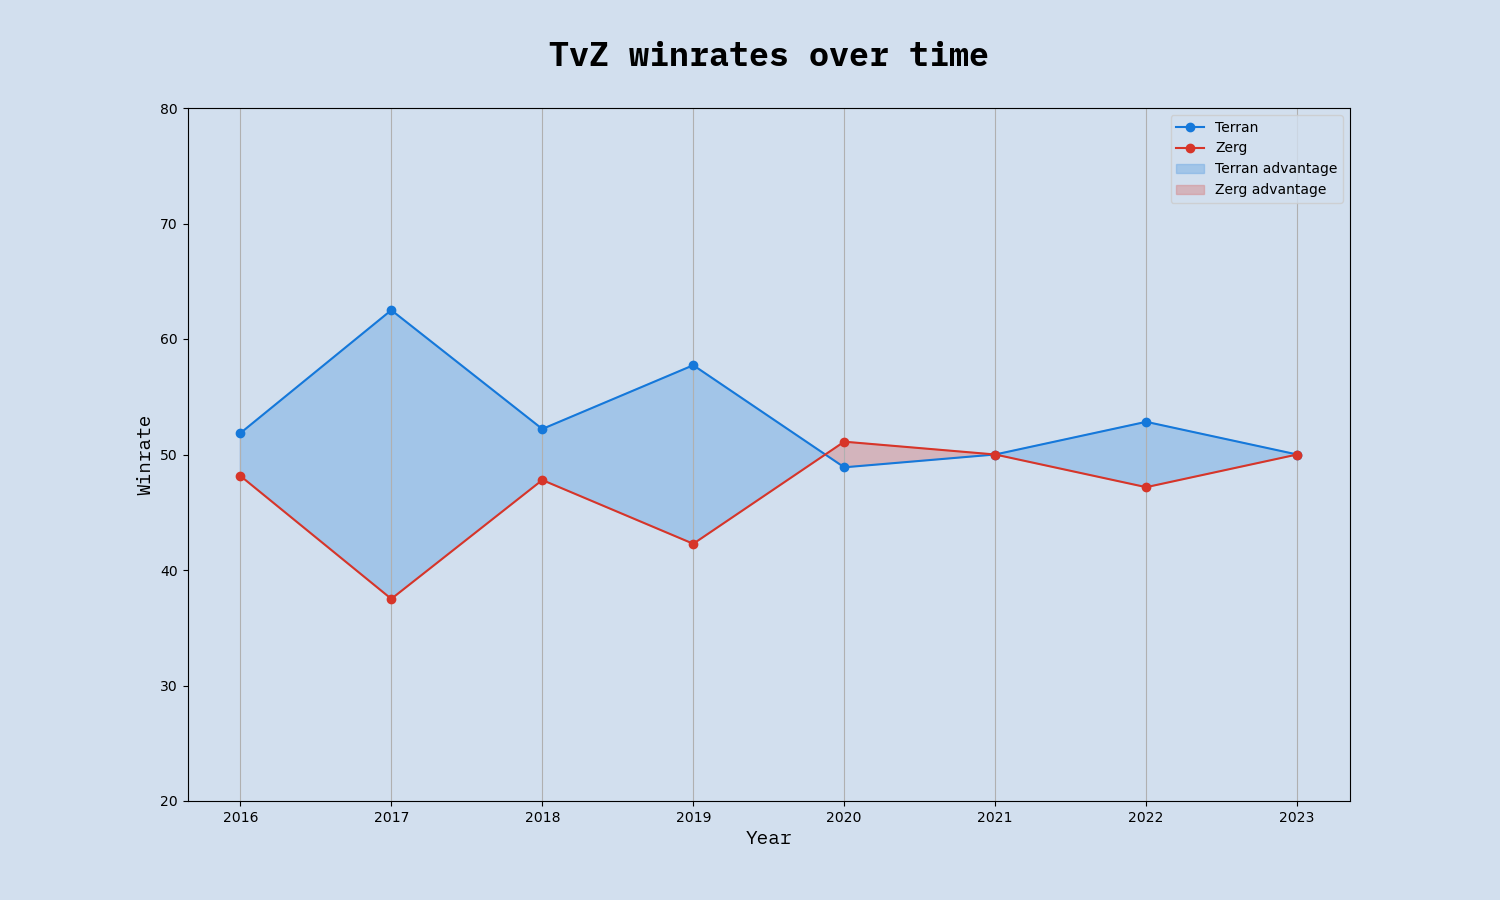 TvZ winrate year on year